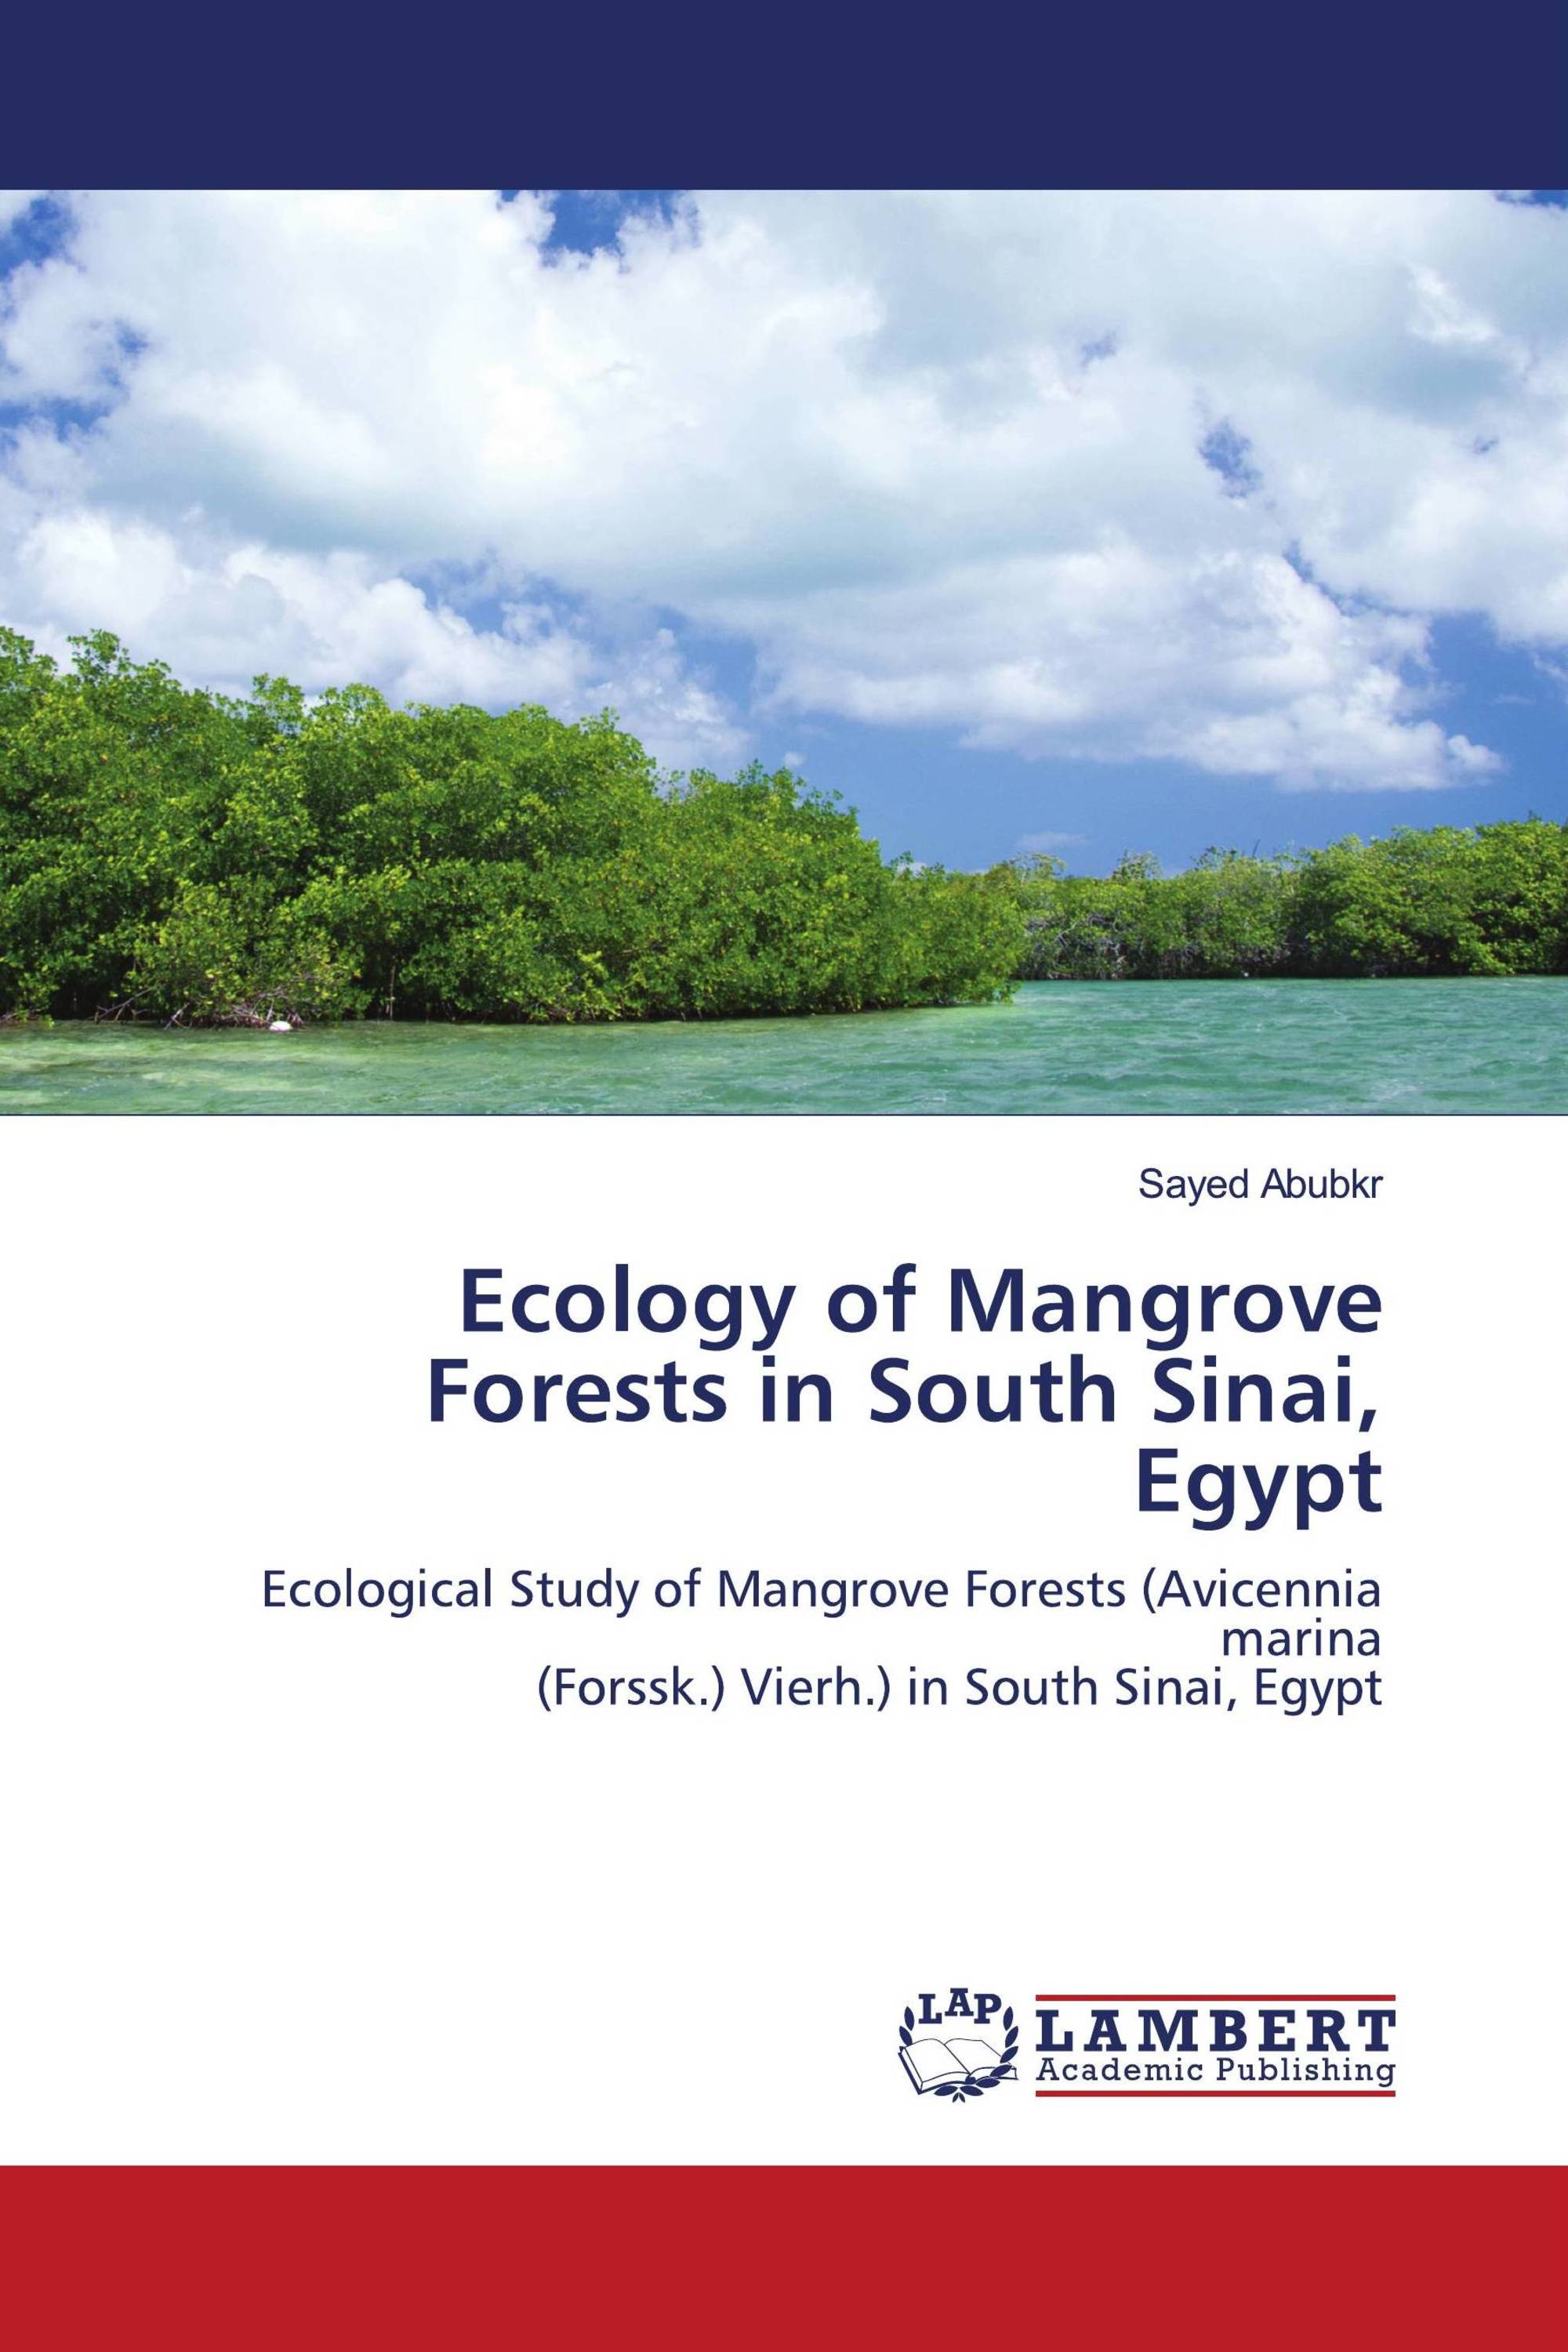 Ecology of Mangrove Forests in South Sinai, Egypt